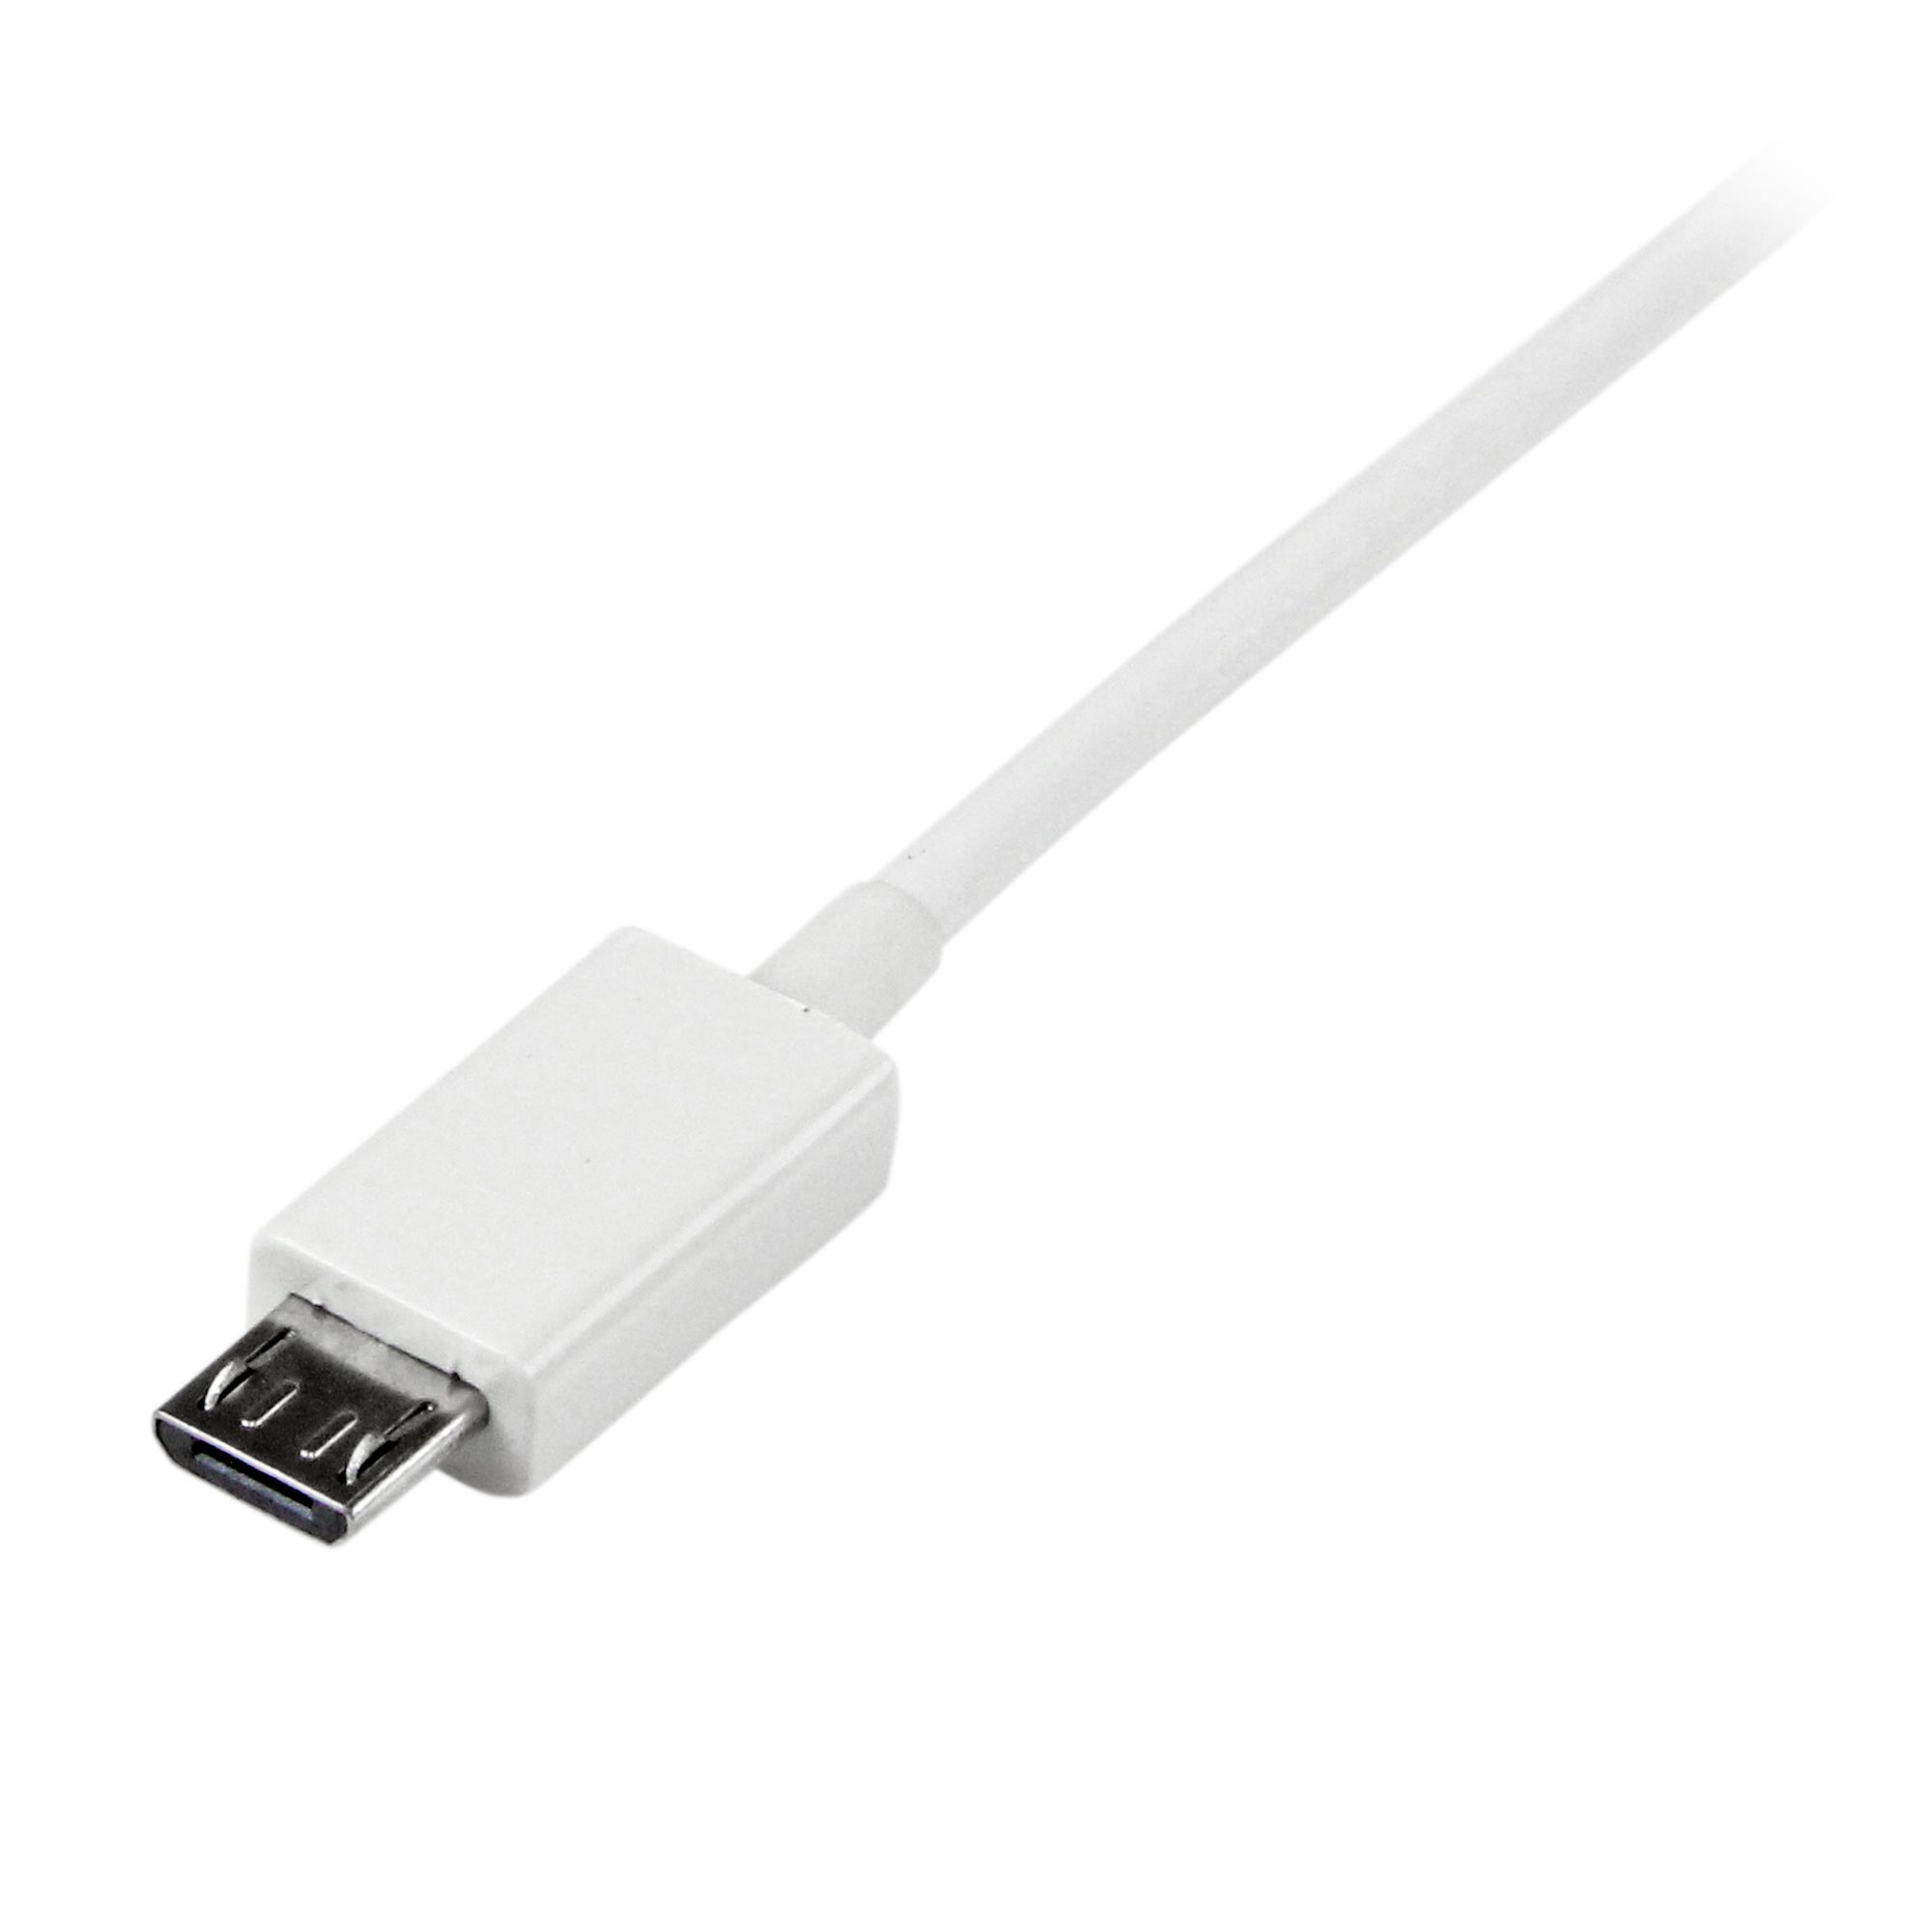 2m White Micro USB Cable - A to Micro B - Micro USB Cables